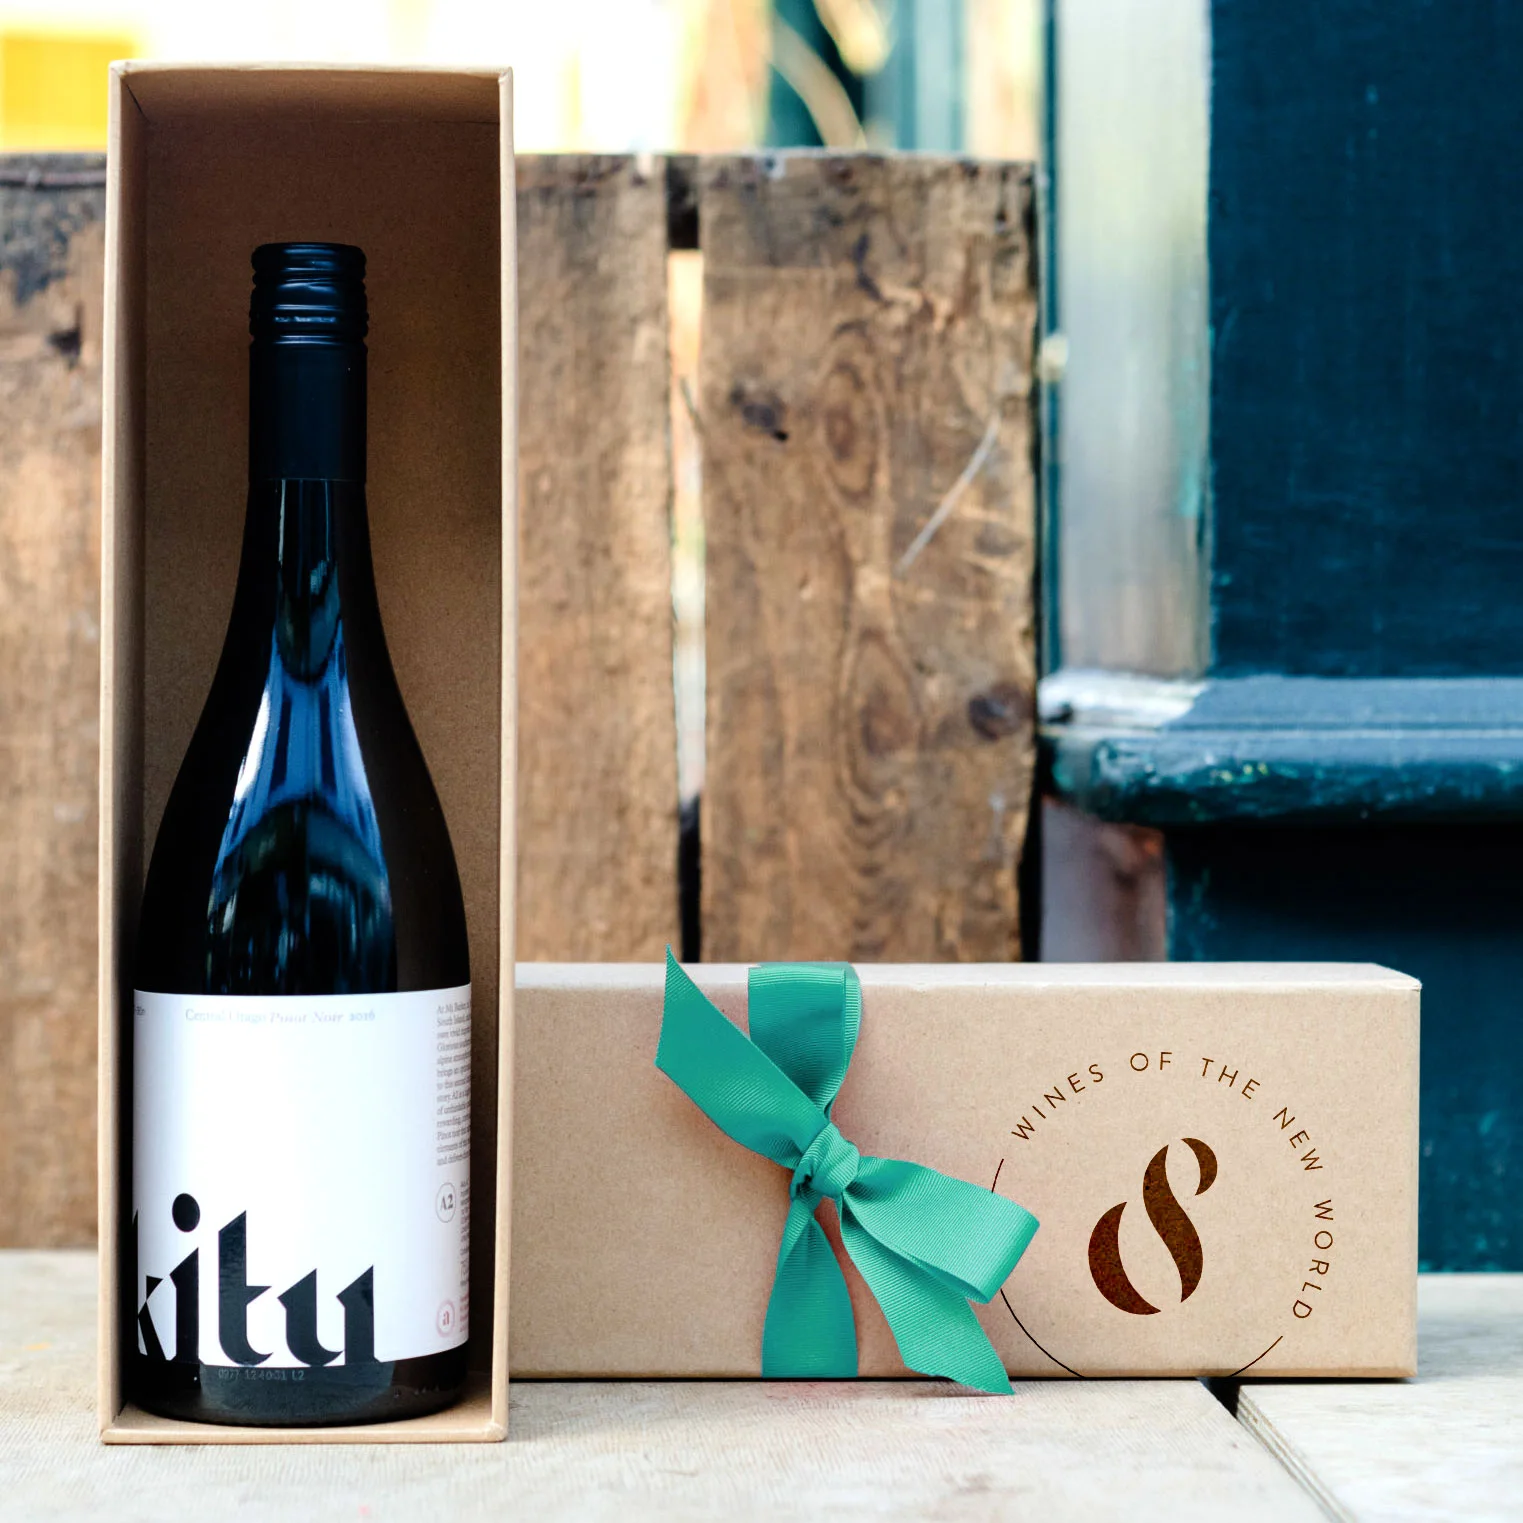 a wine gift box showing the Specialist Cellars brand identity